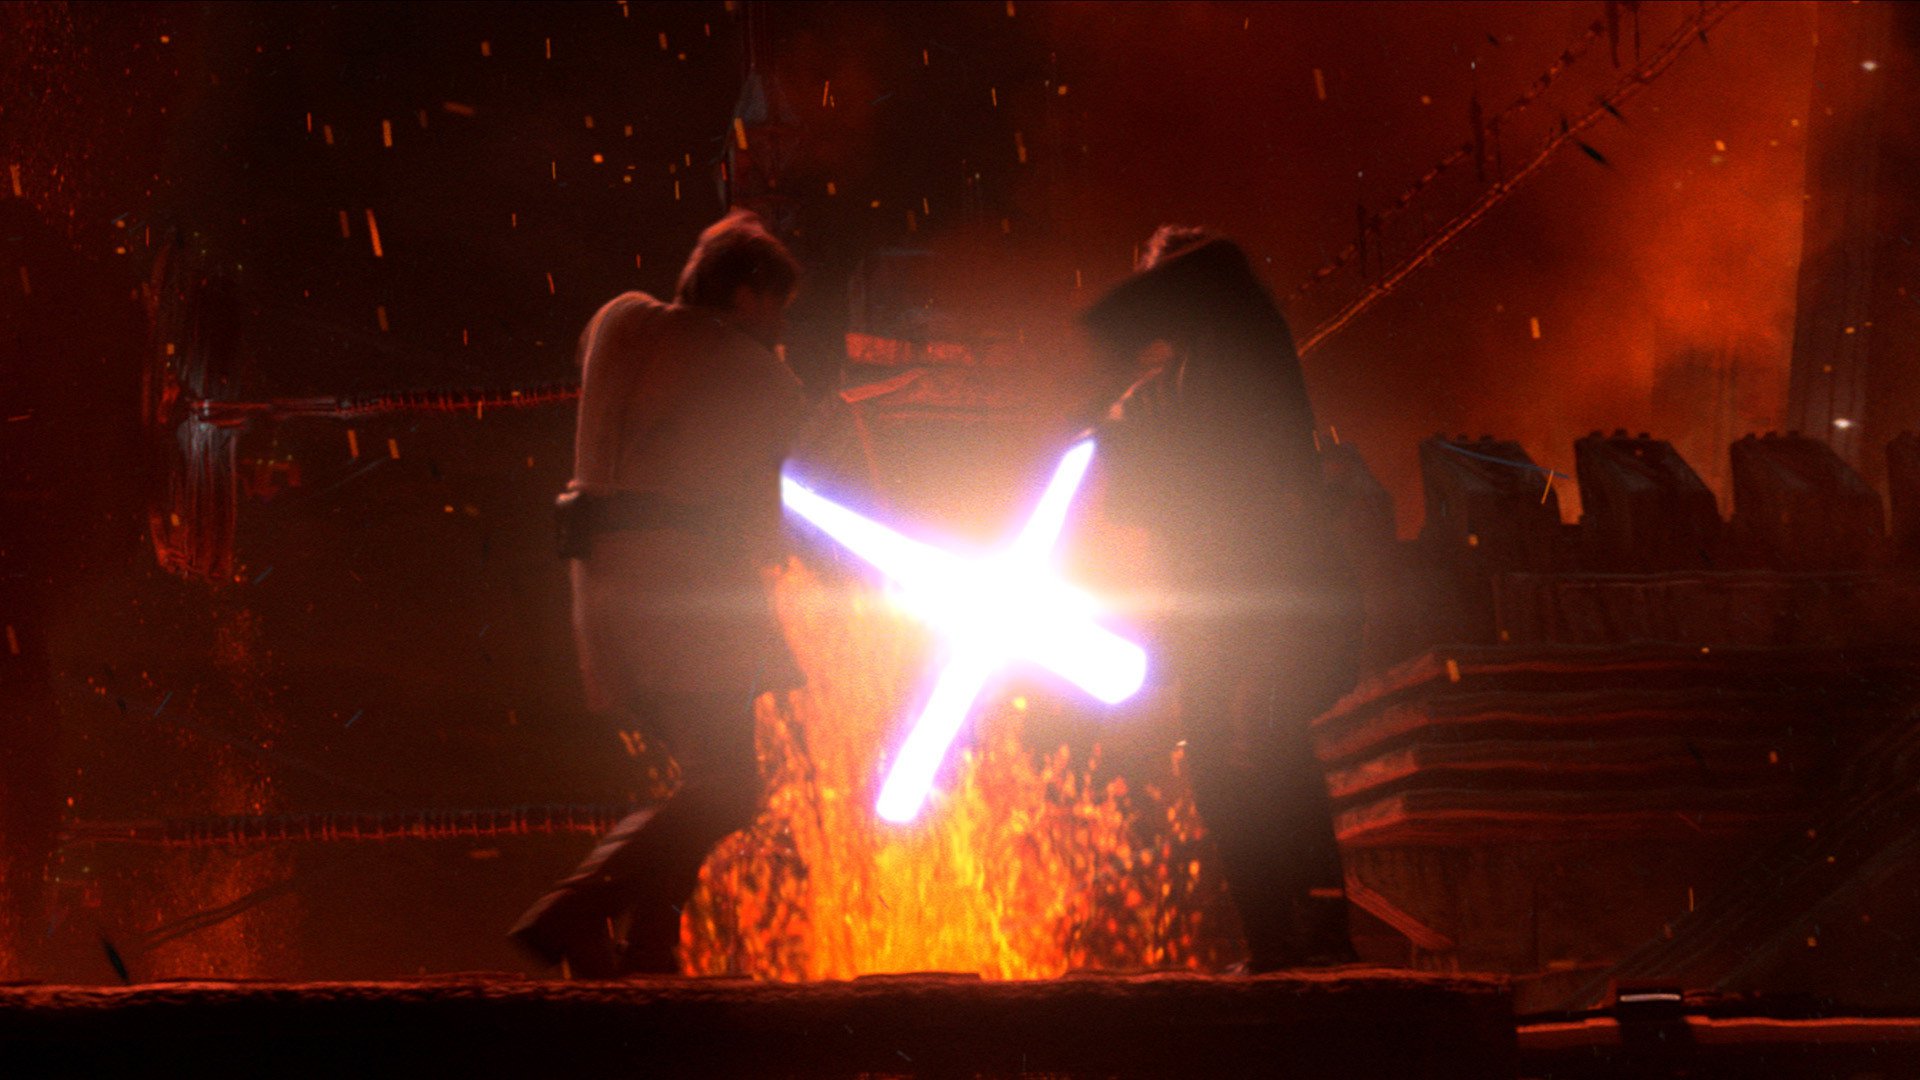 Star Wars Ep. III: Revenge of the Sith instal the new